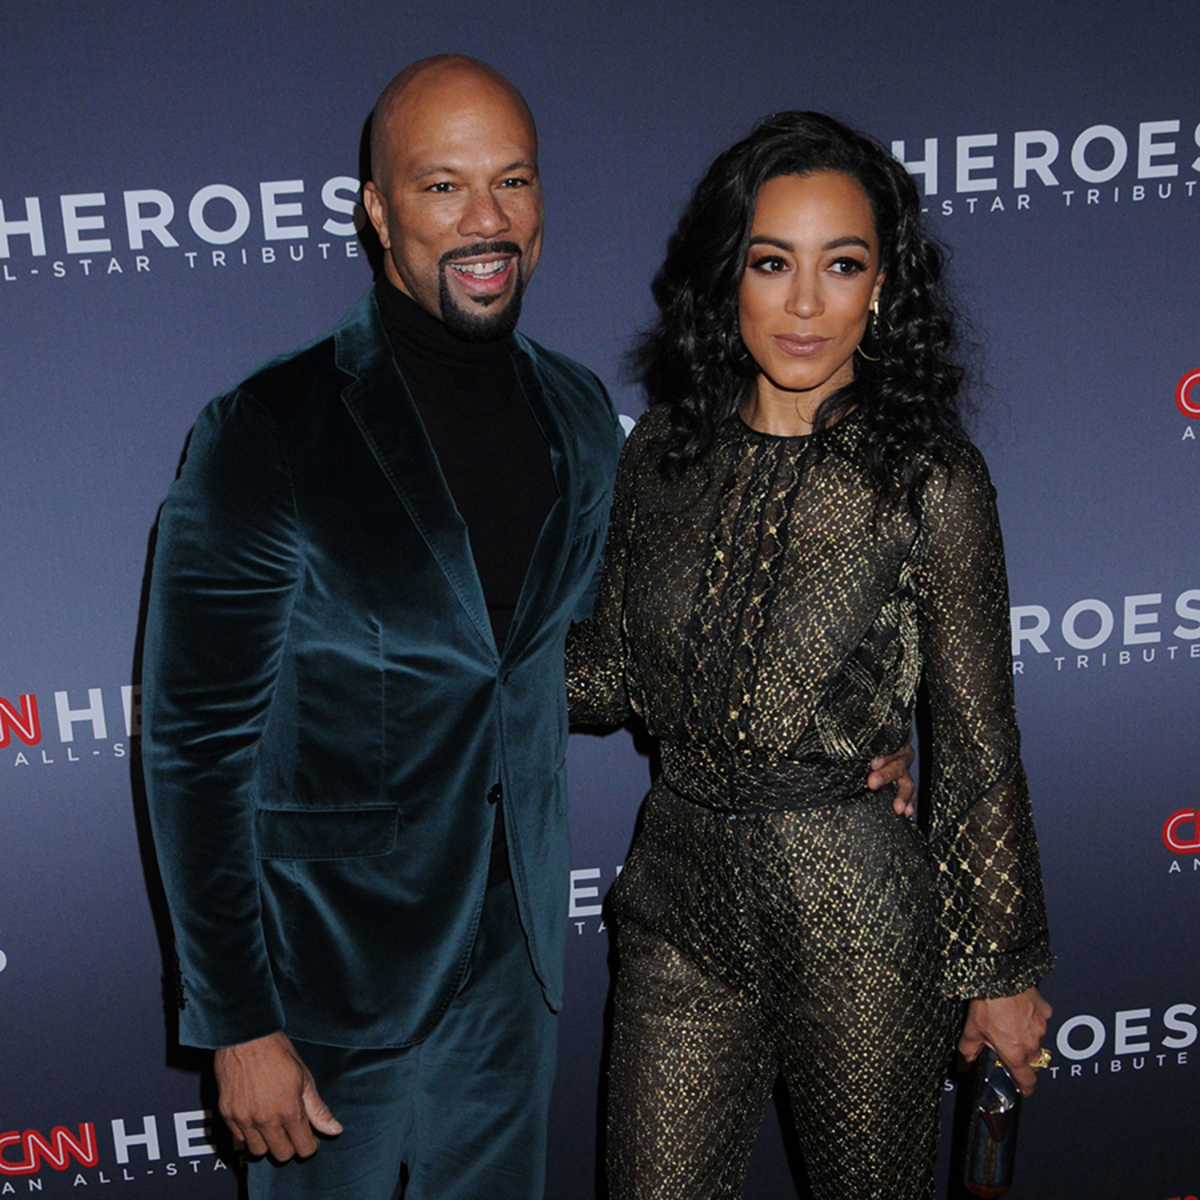 Angela and Common while attending an event